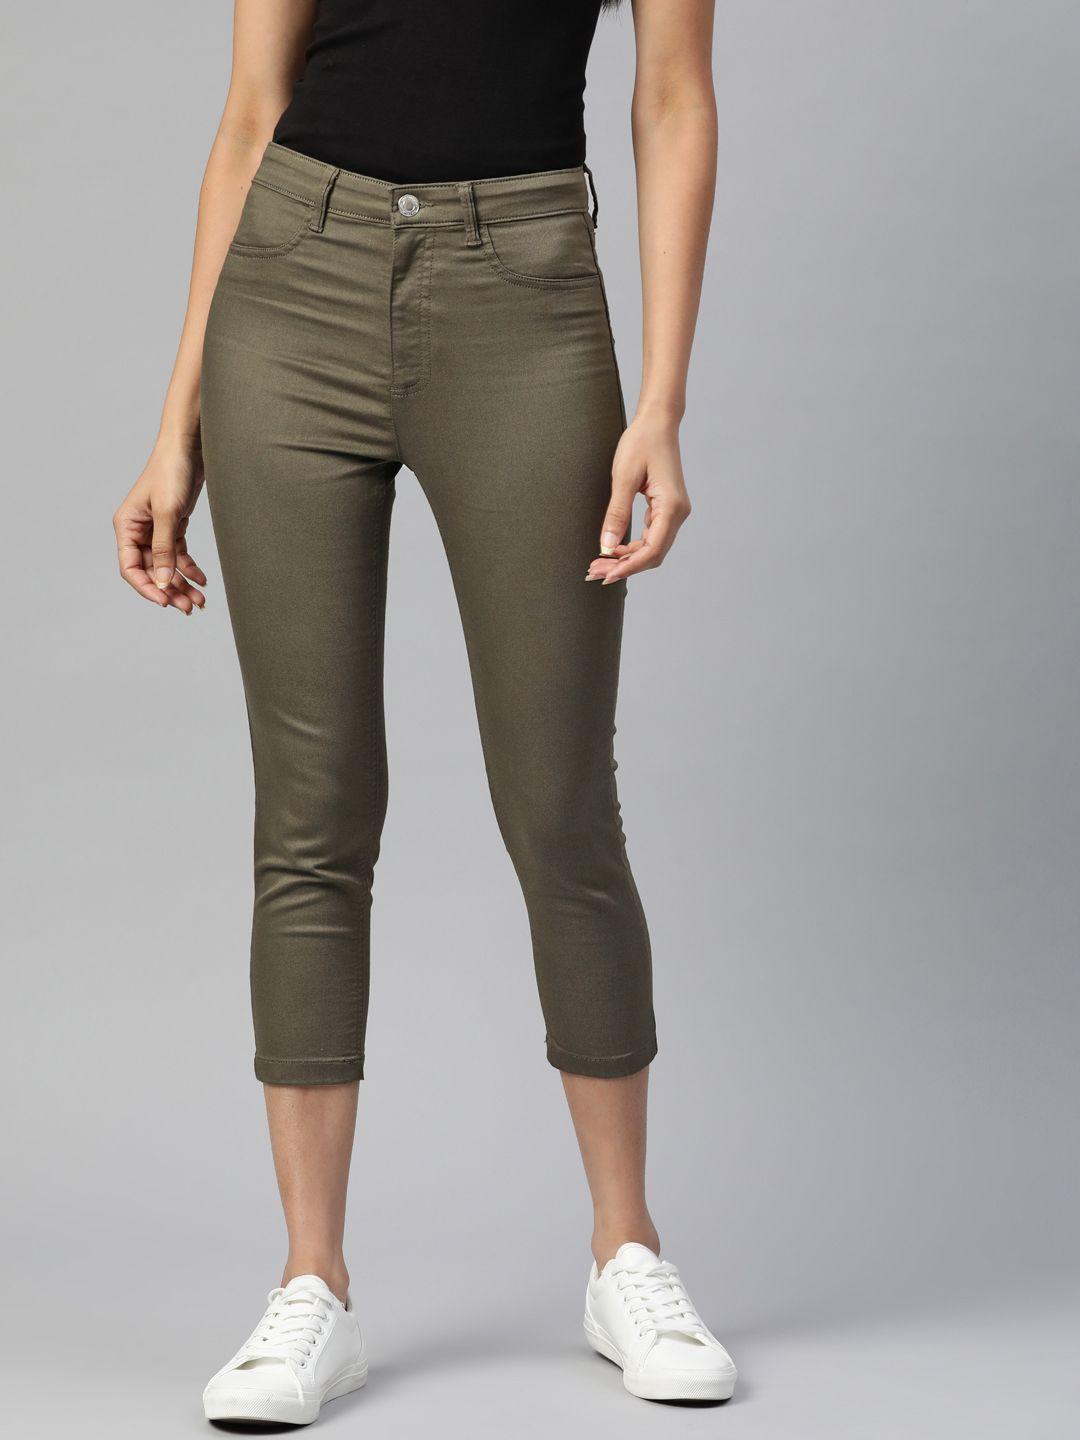 marks & spencer women olive green solid three-fourth jeggings